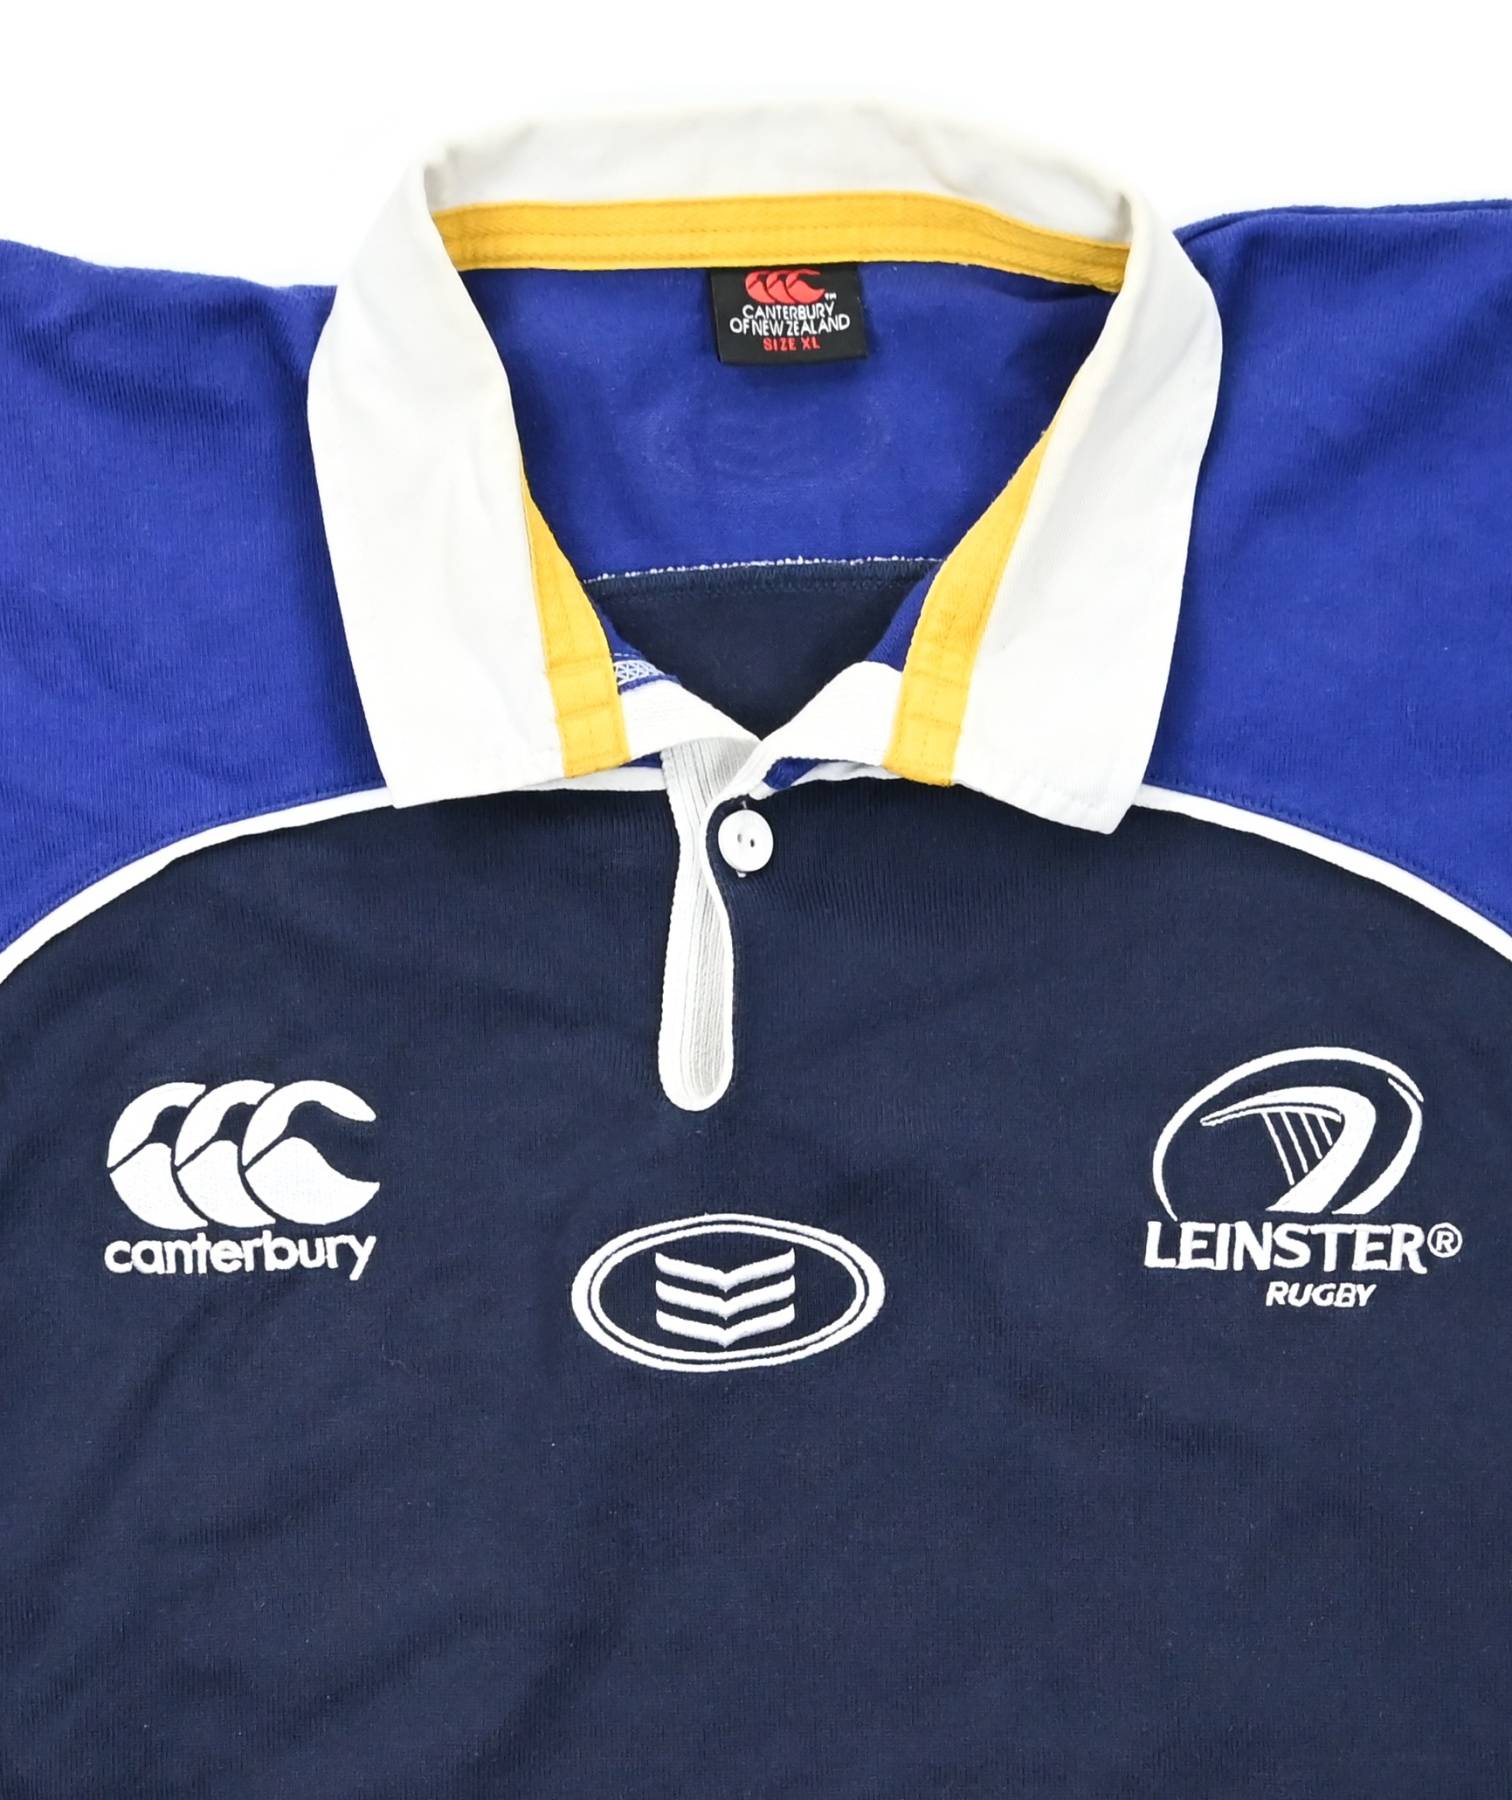 IRELAND RUGBY SHIRT XL Rugby \ Rugby Union \ Leinster | Classic-Shirts.com